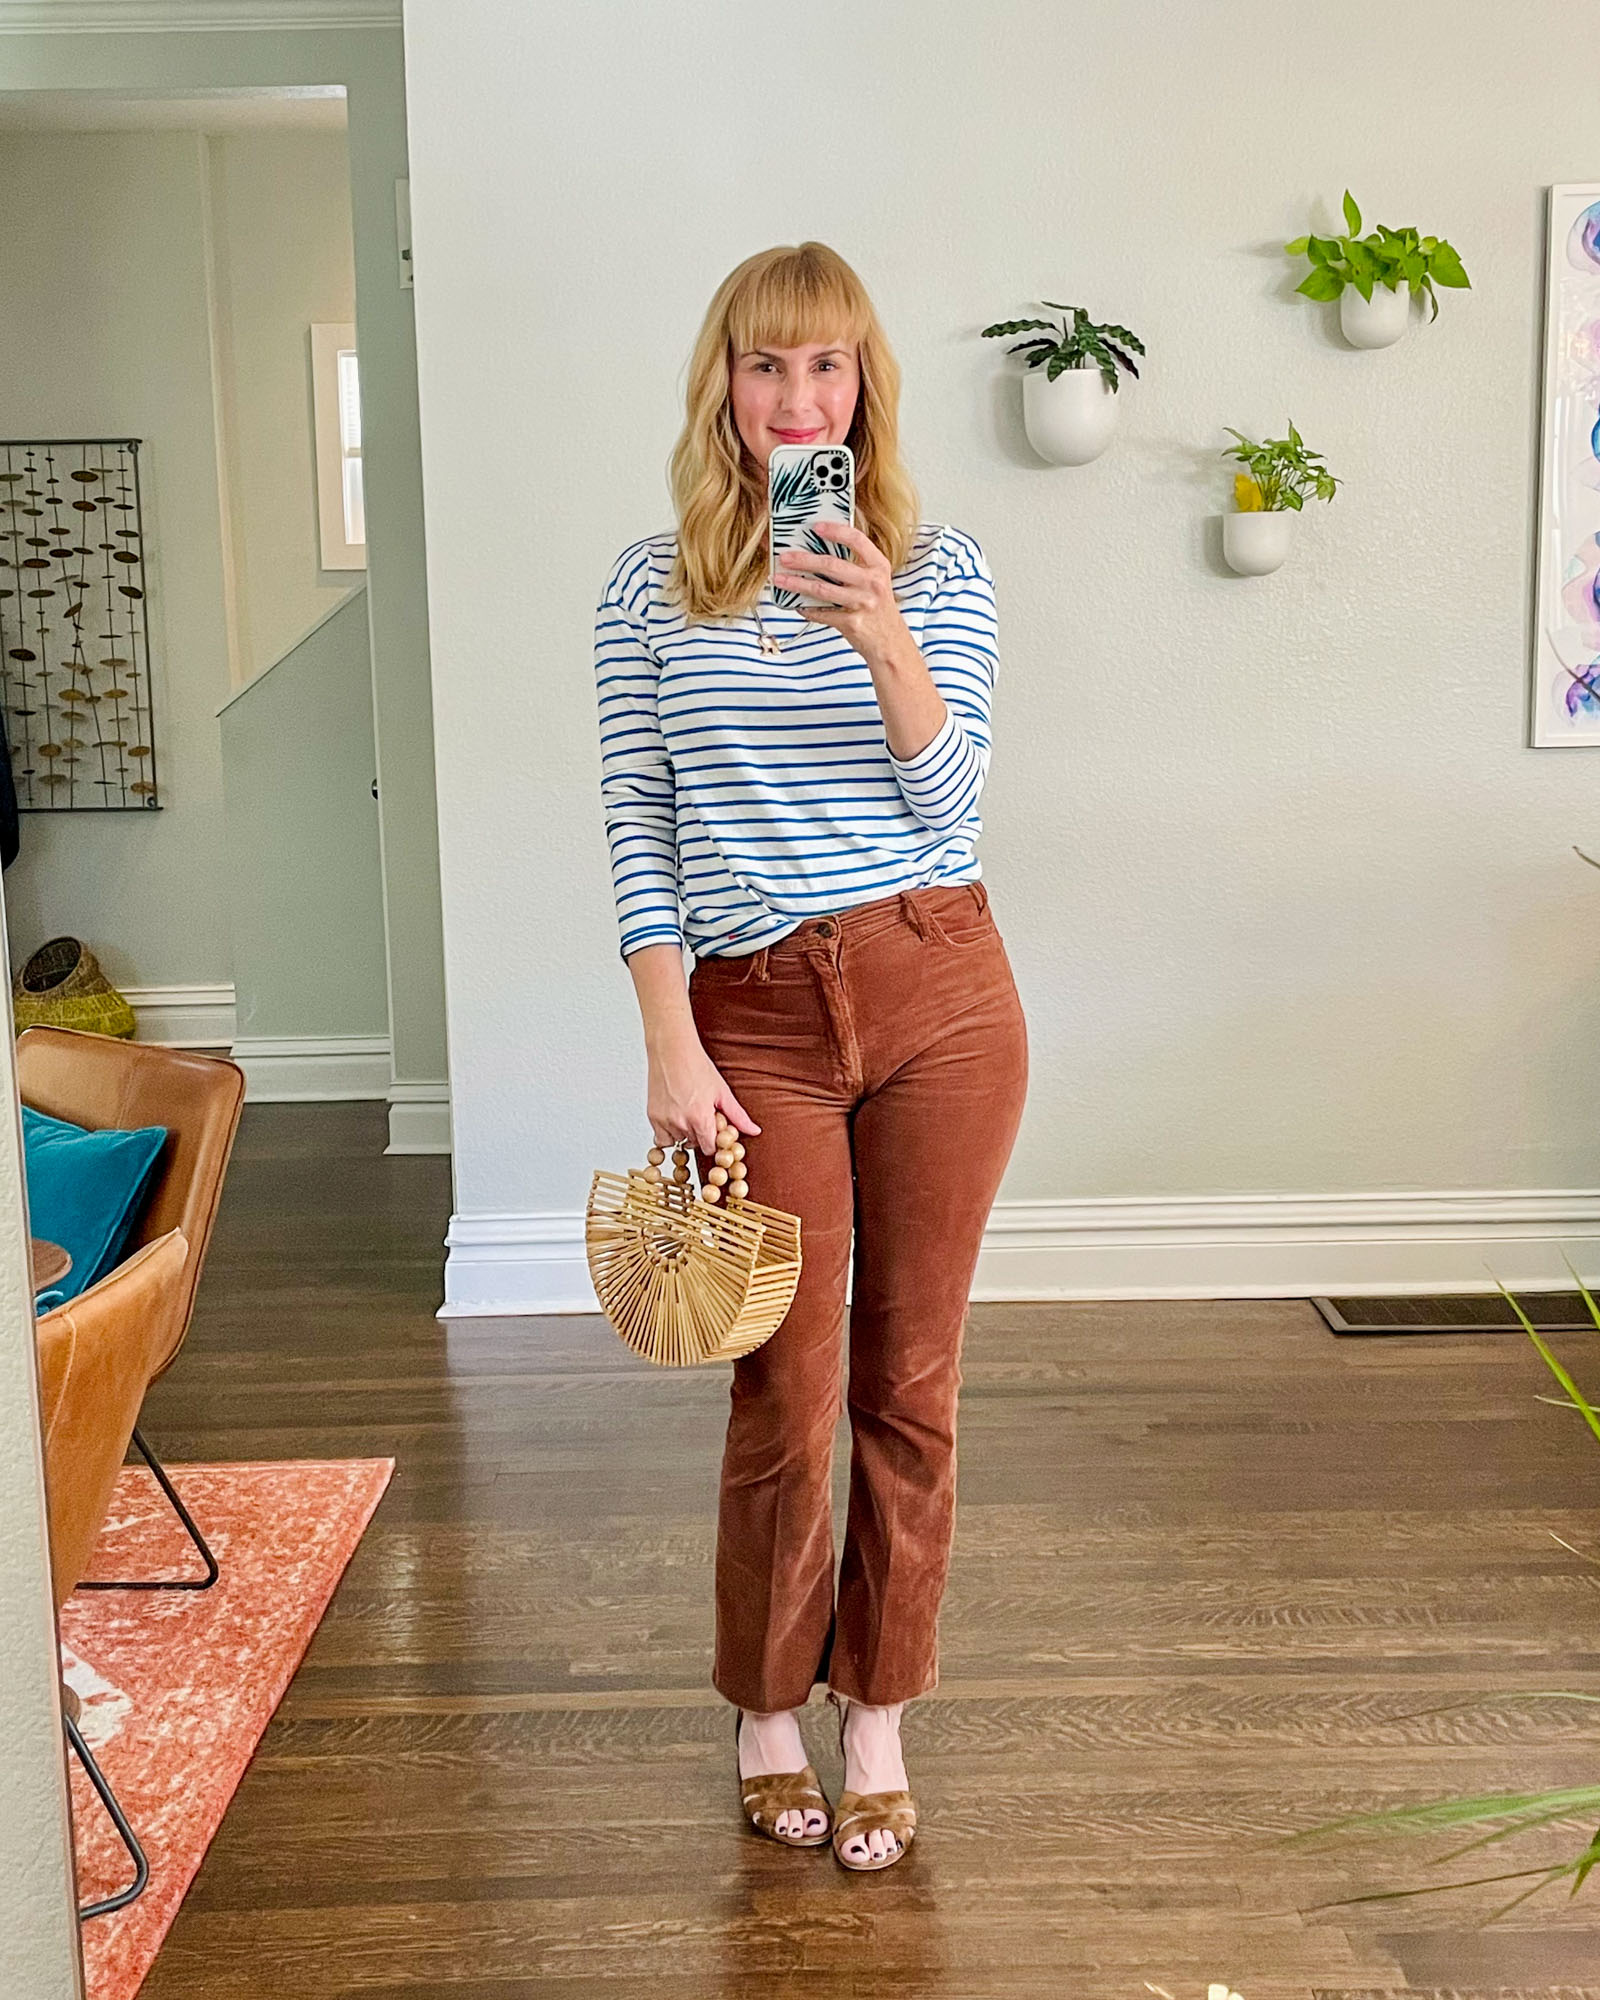 Wearing the Mother Hustler trousers in brown corduroy with a blue and white stripe tee by KULE and brown sandals.